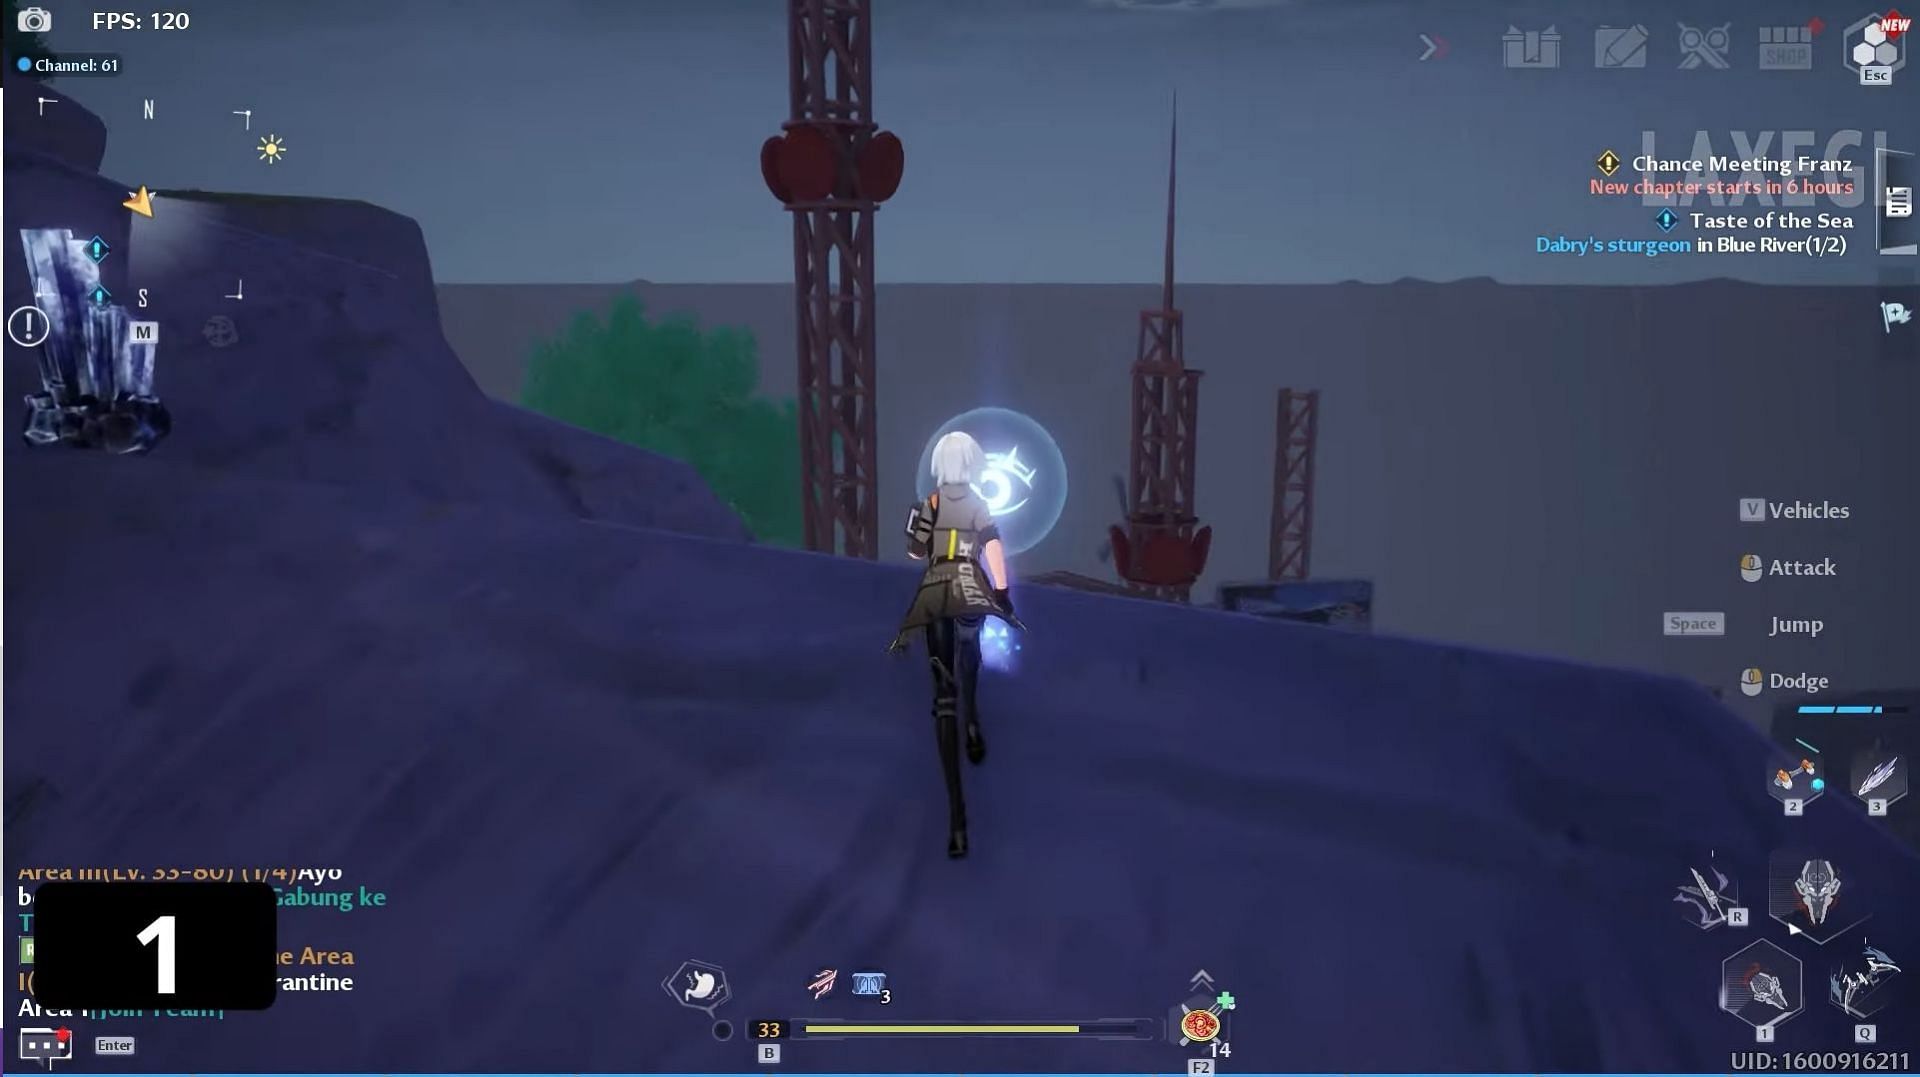 The first Scenic Point in Banges (Image via LAXEGI/YouTube)